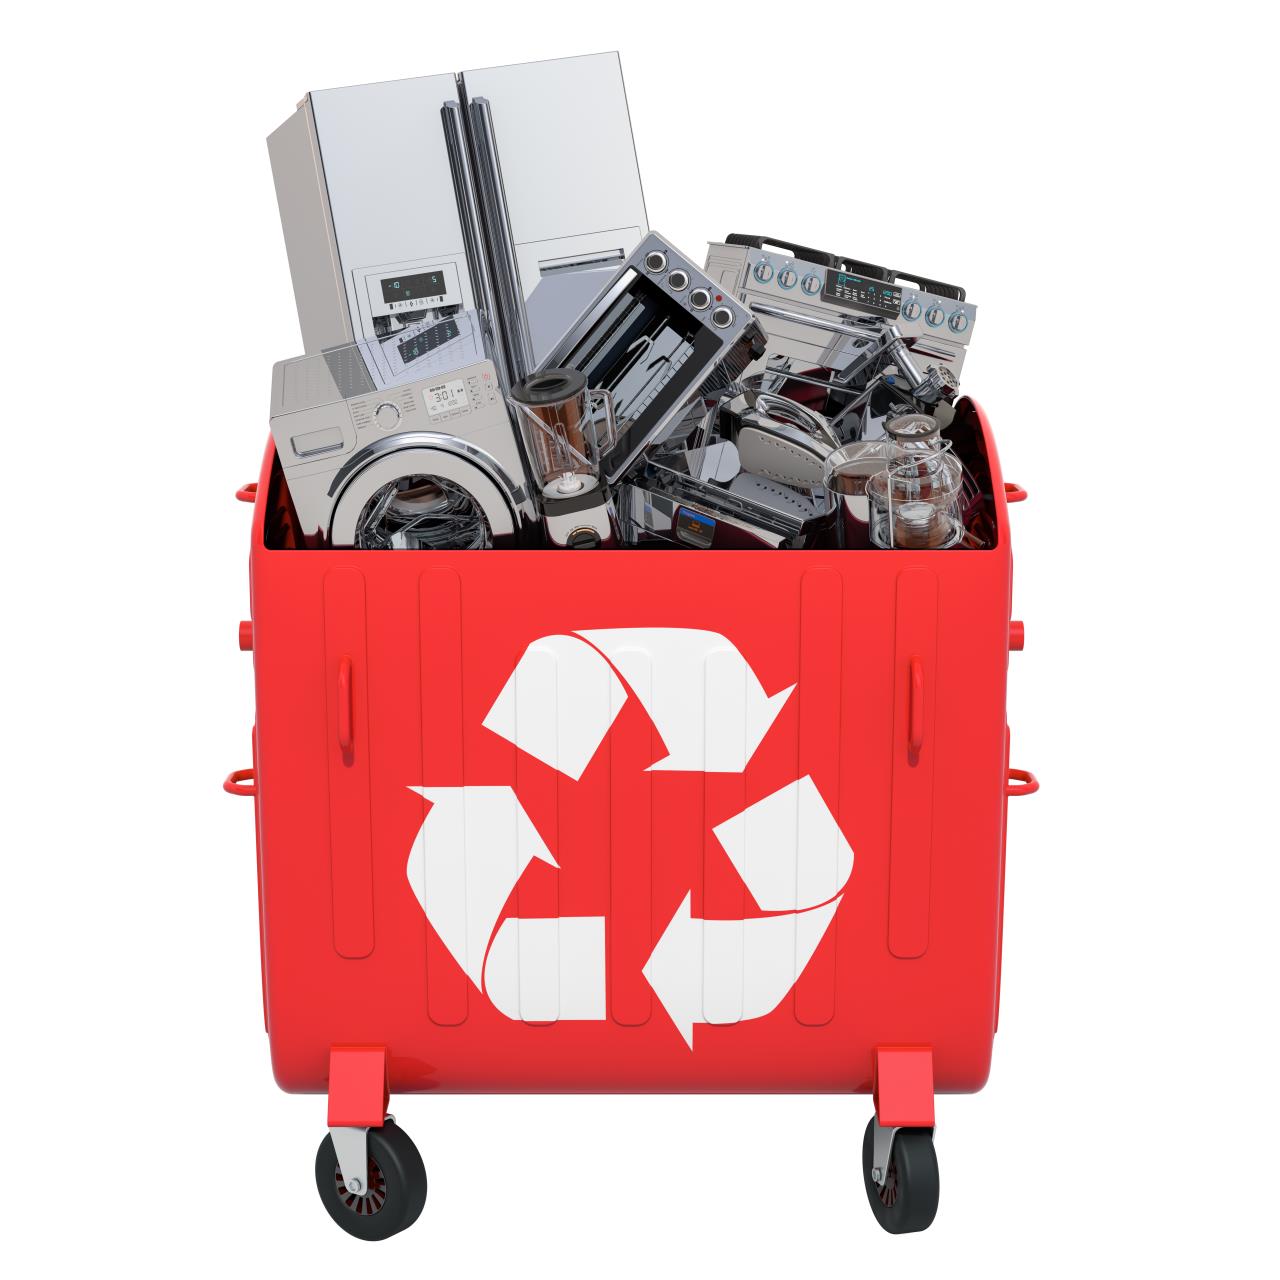 E-waste recovery now regulated